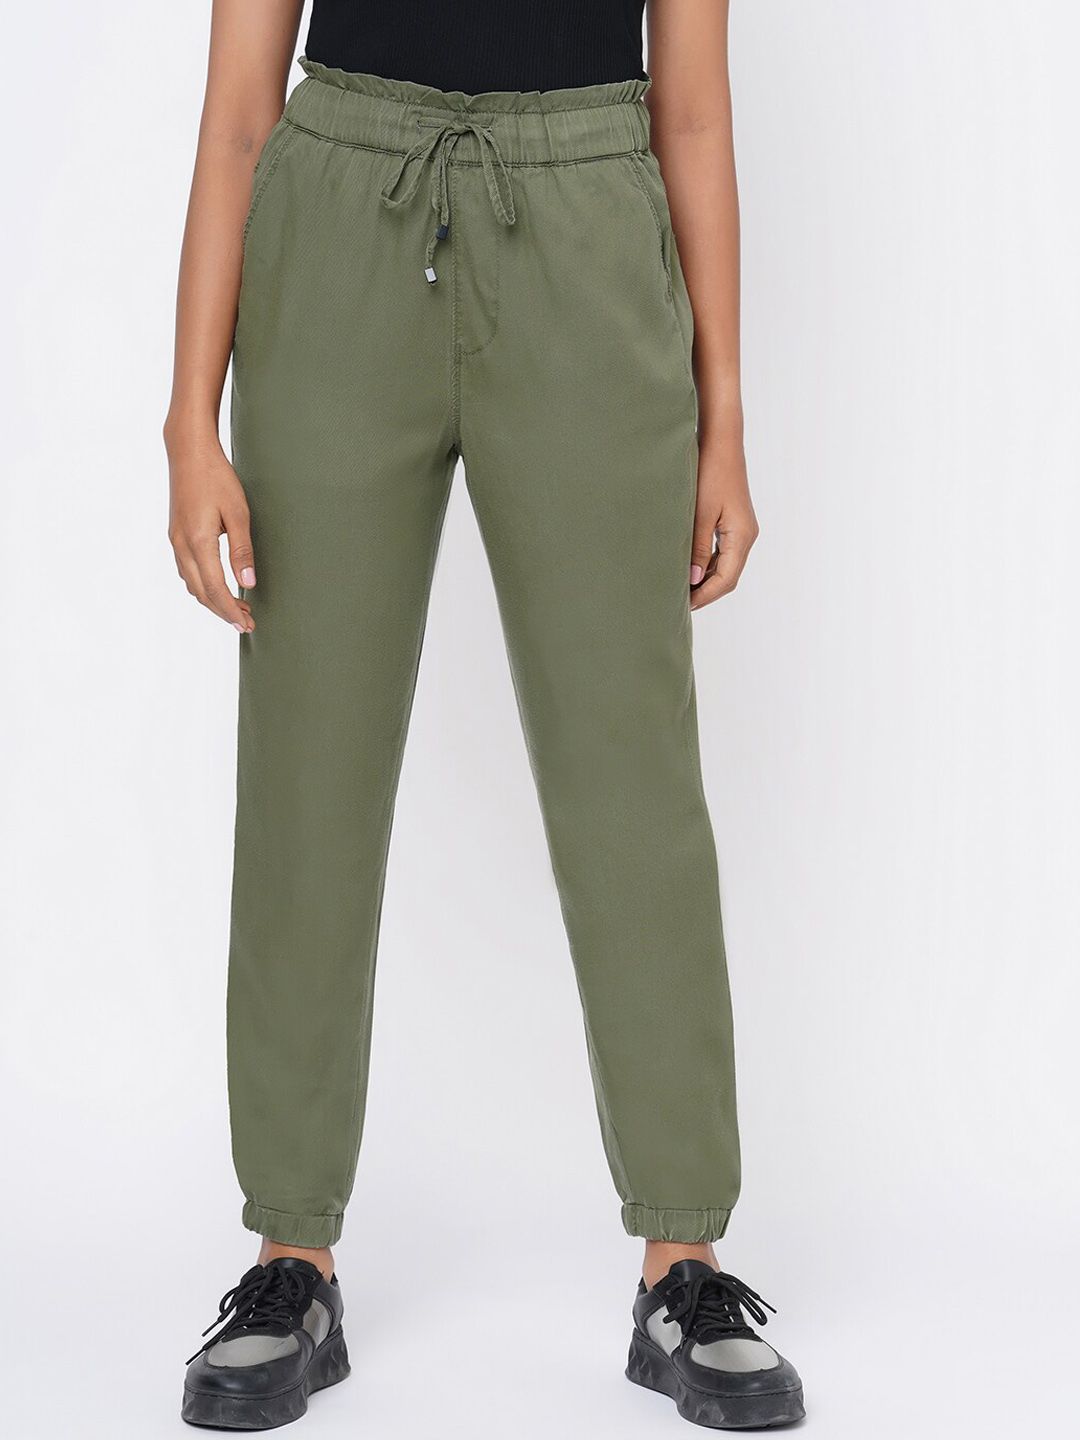 Kraus Jeans Women Olive Green High-Rise Joggers Trousers Price in India